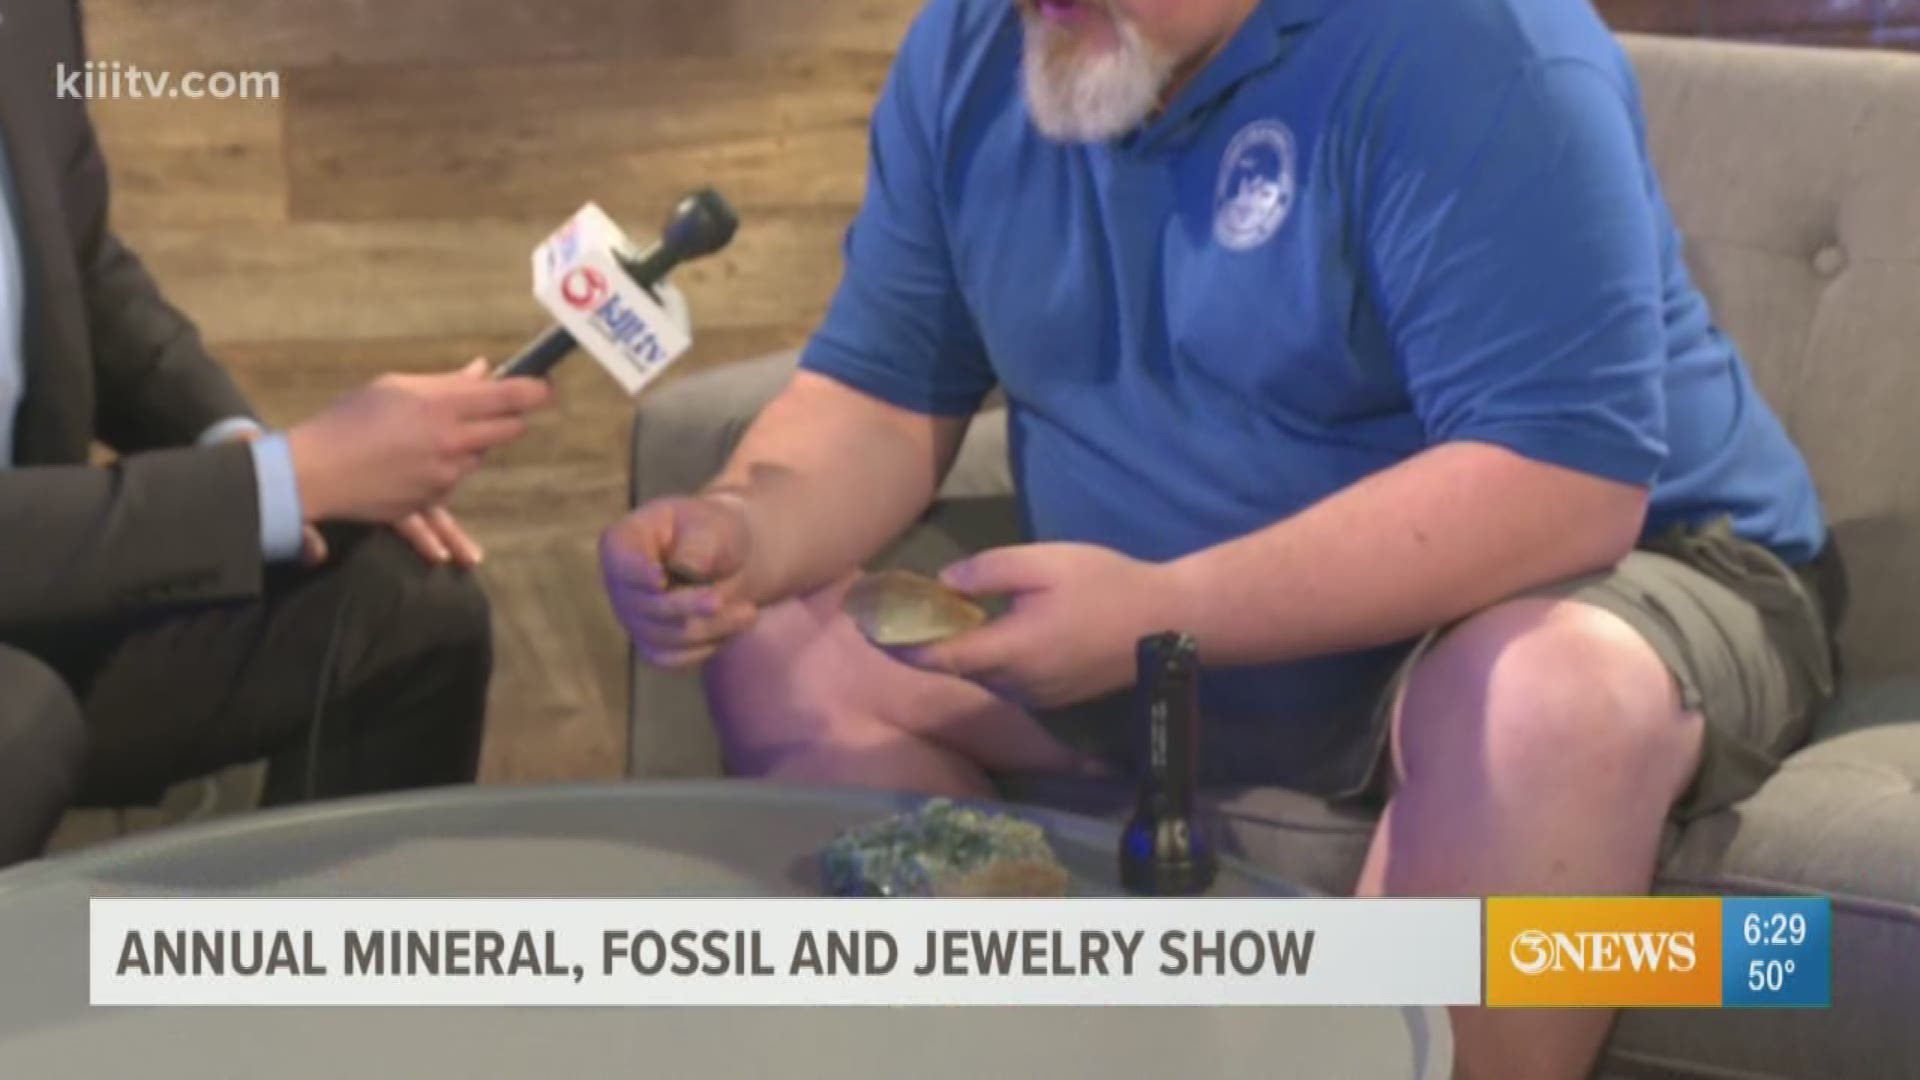 Robstown will host the 58th Annual Mineral, Fossil, & Jewelry Show at the Borchard Fairgrounds this upcoming weekend.